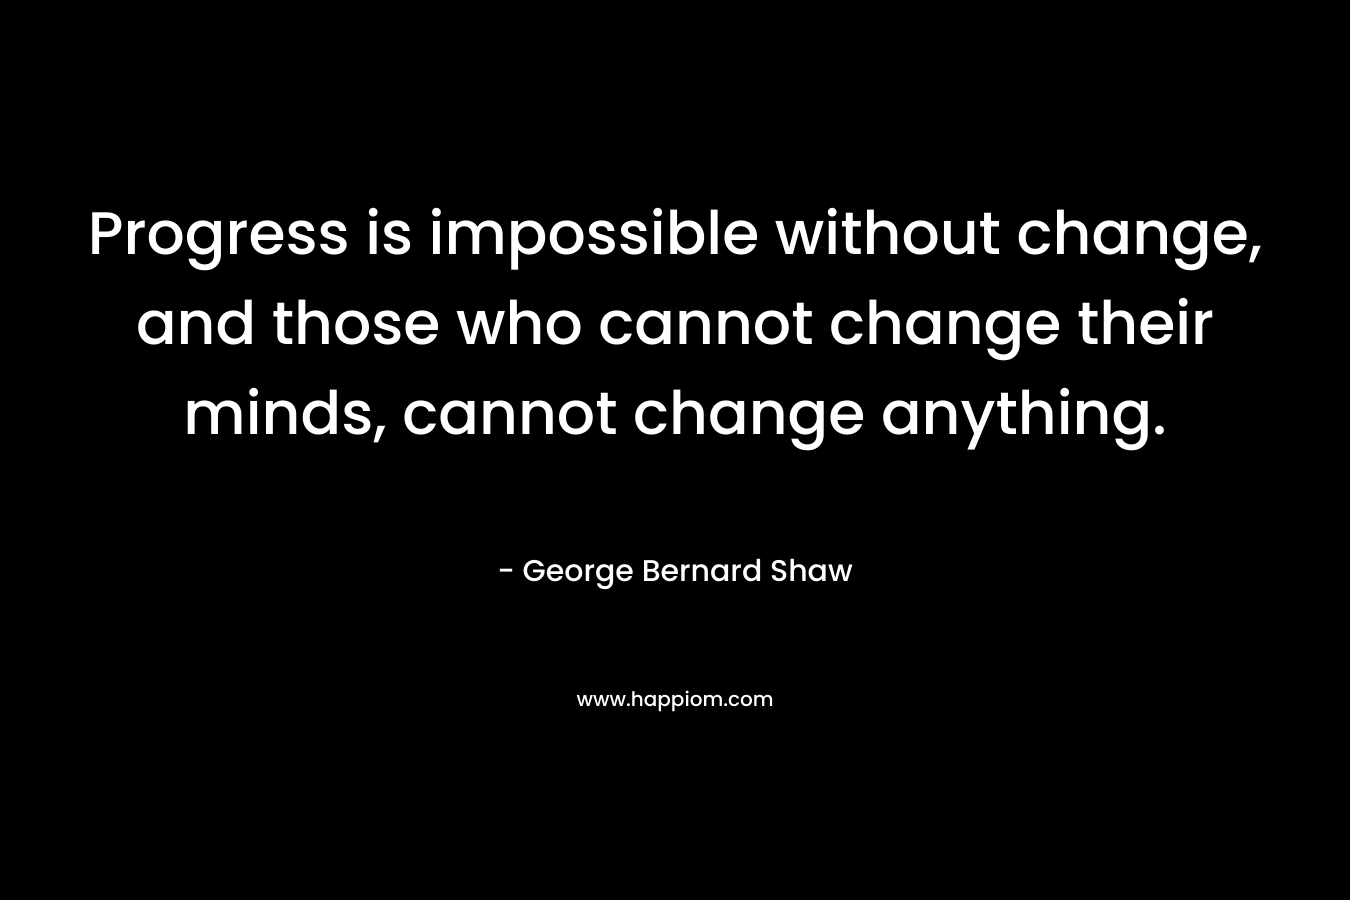 Progress is impossible without change, and those who cannot change their minds, cannot change anything.